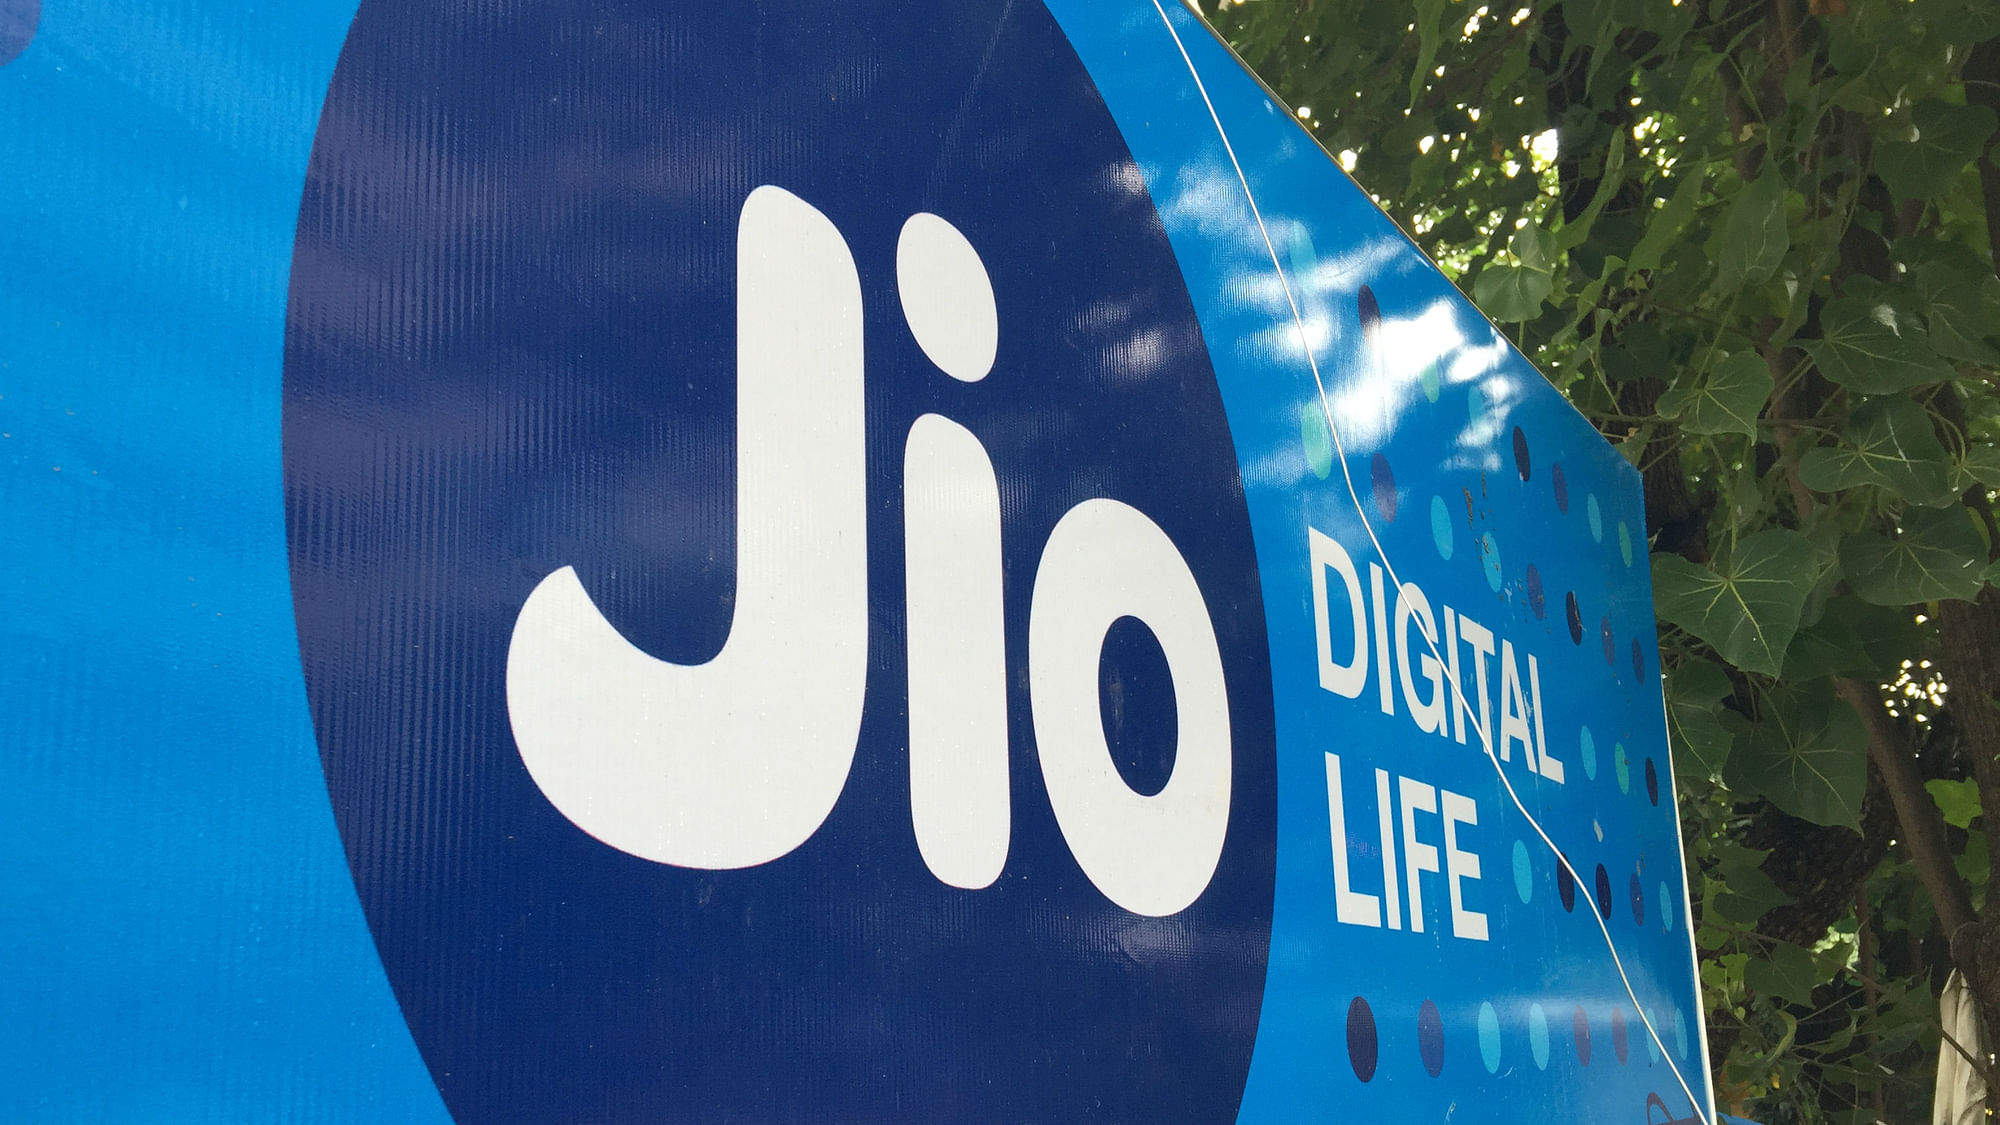 Reliance Jio board outside a mobile store. (Photo Courtesy: BloombergQuint)